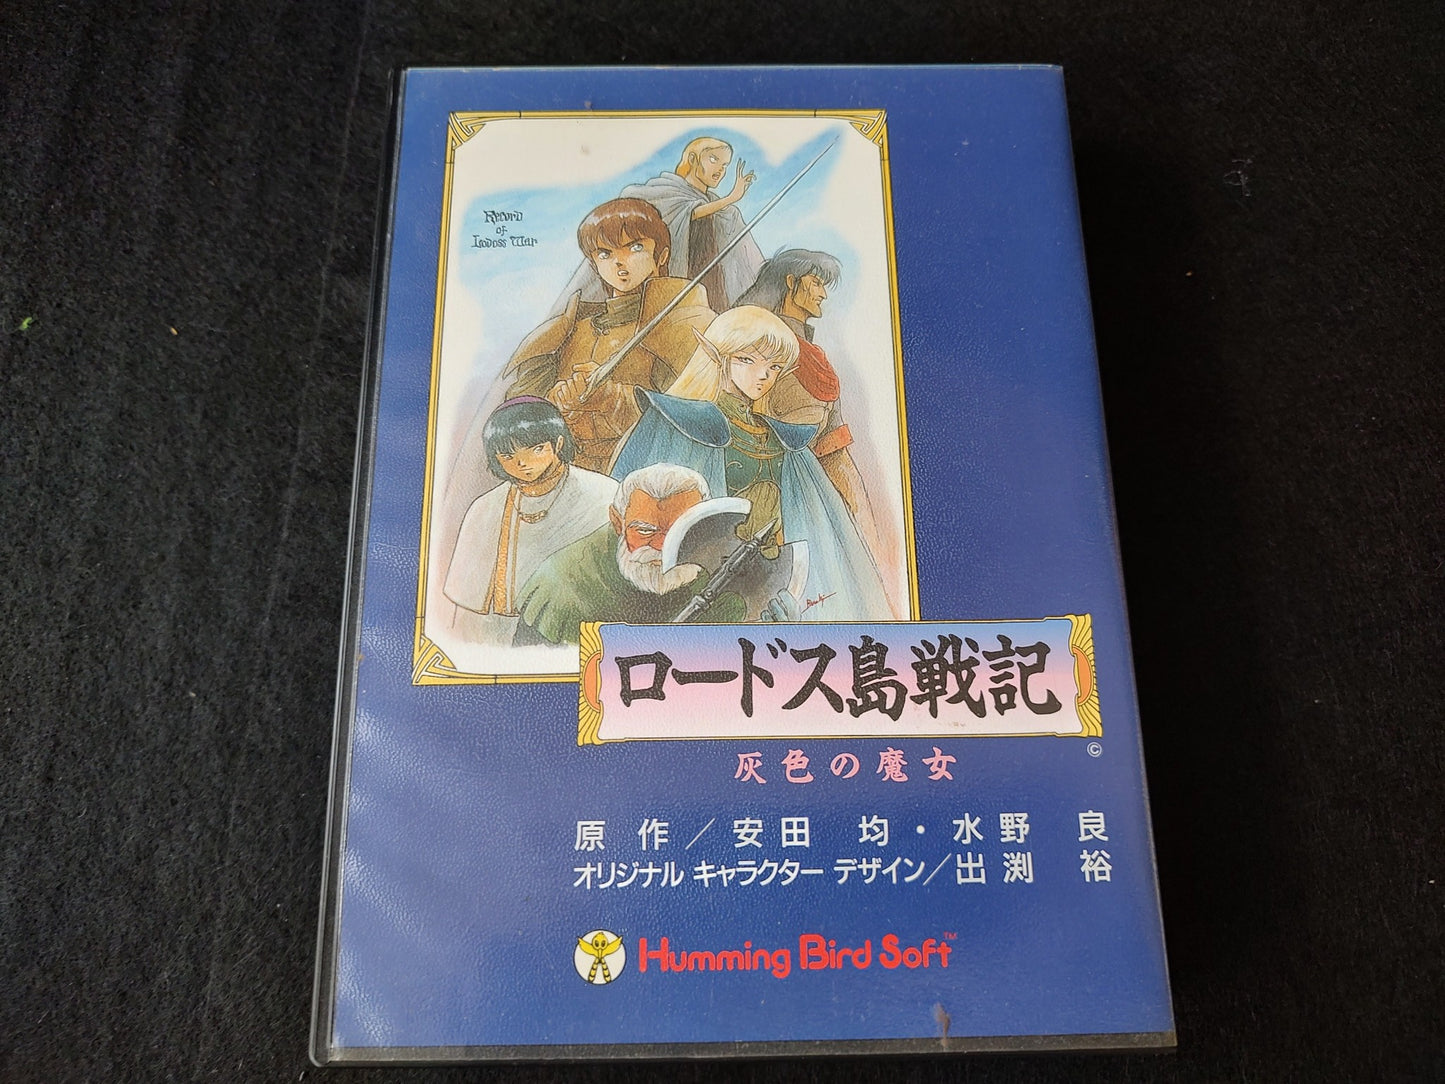 Record of Lodoss War SHARP X68000 Game w/Manual, and Box set, Working-f0520-